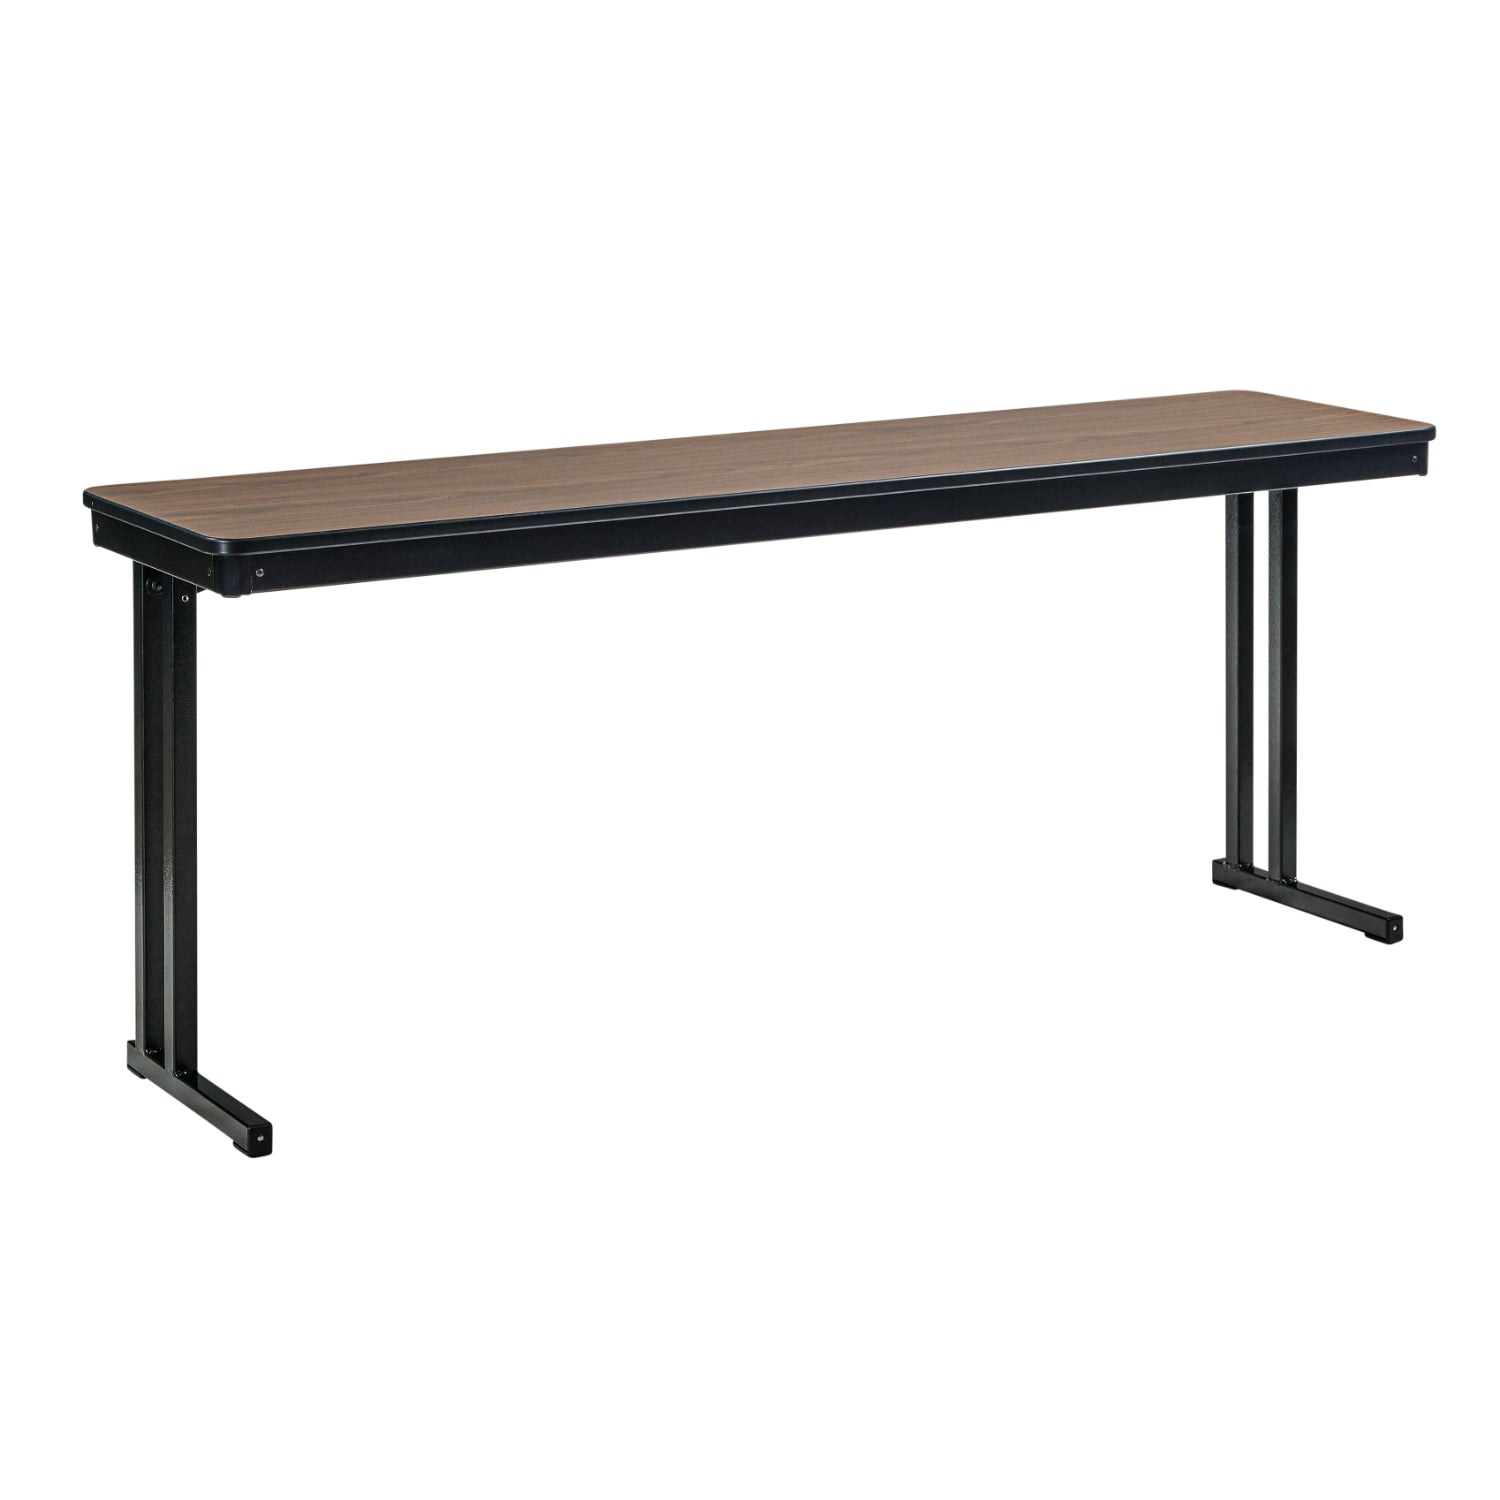 Max Seating Folding Training and Seminar Table with Cantilever Legs, 18" x 96", High Pressure Laminate Top with Plywood Core/PVC Edge Banding